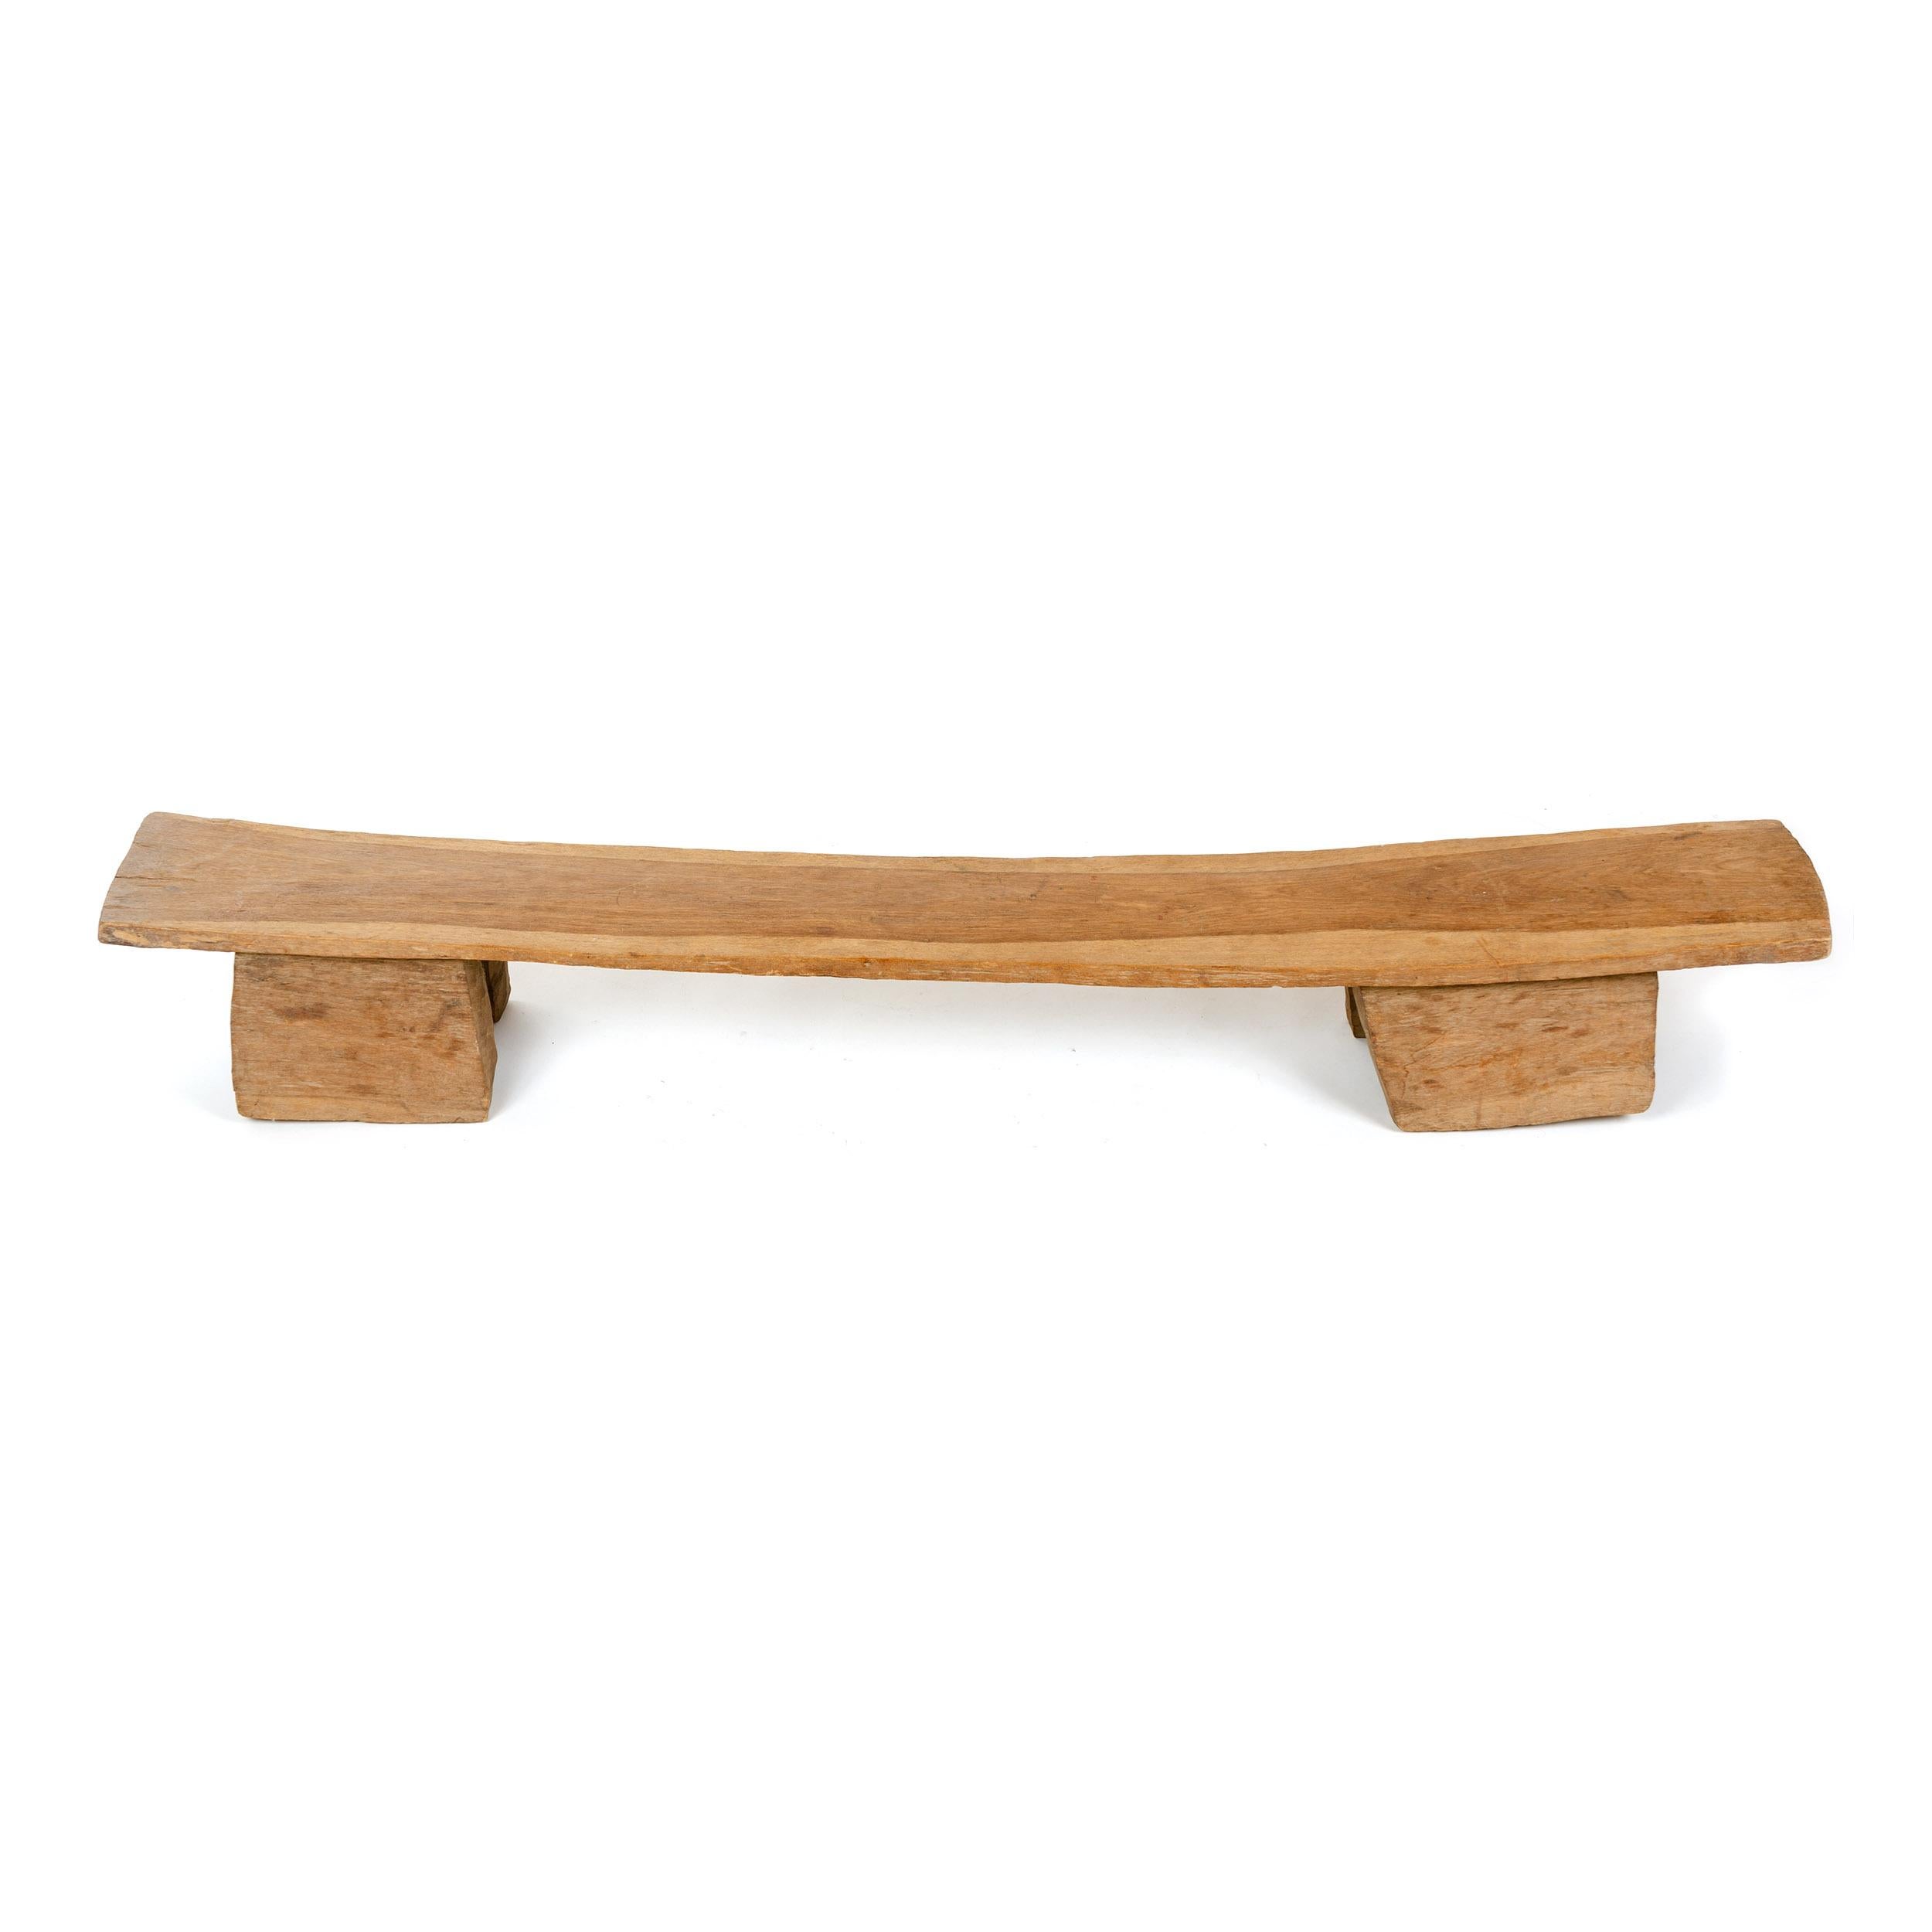 An African freeform bench carved of a single piece of wood on four legs.